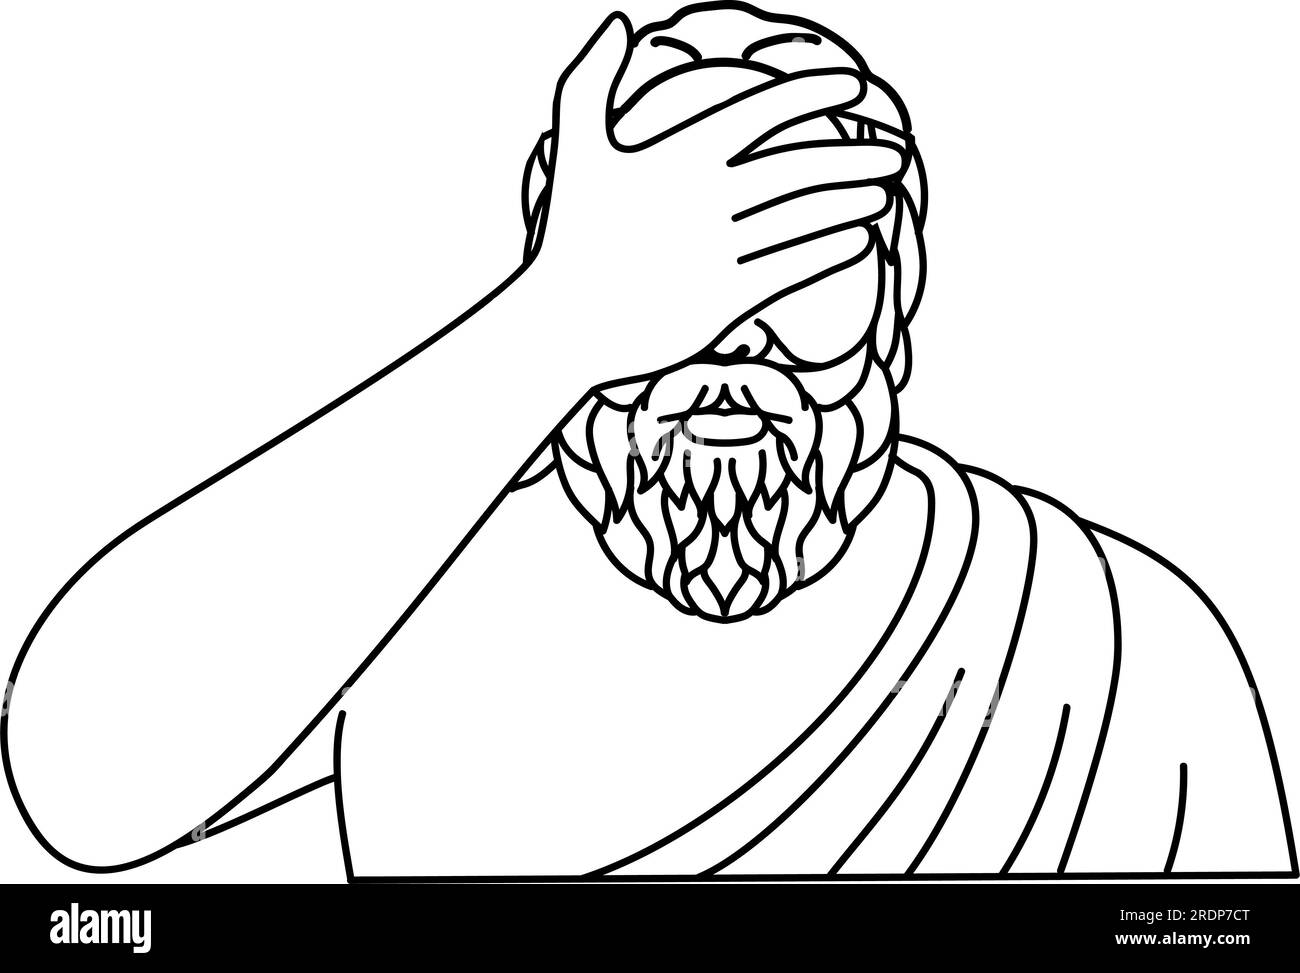 Mono line illustration of Socrates, a Greek  Philosopher doing a facepalm gesture in  disbelief, shame or exasperation done in monoline line art style Stock Photo